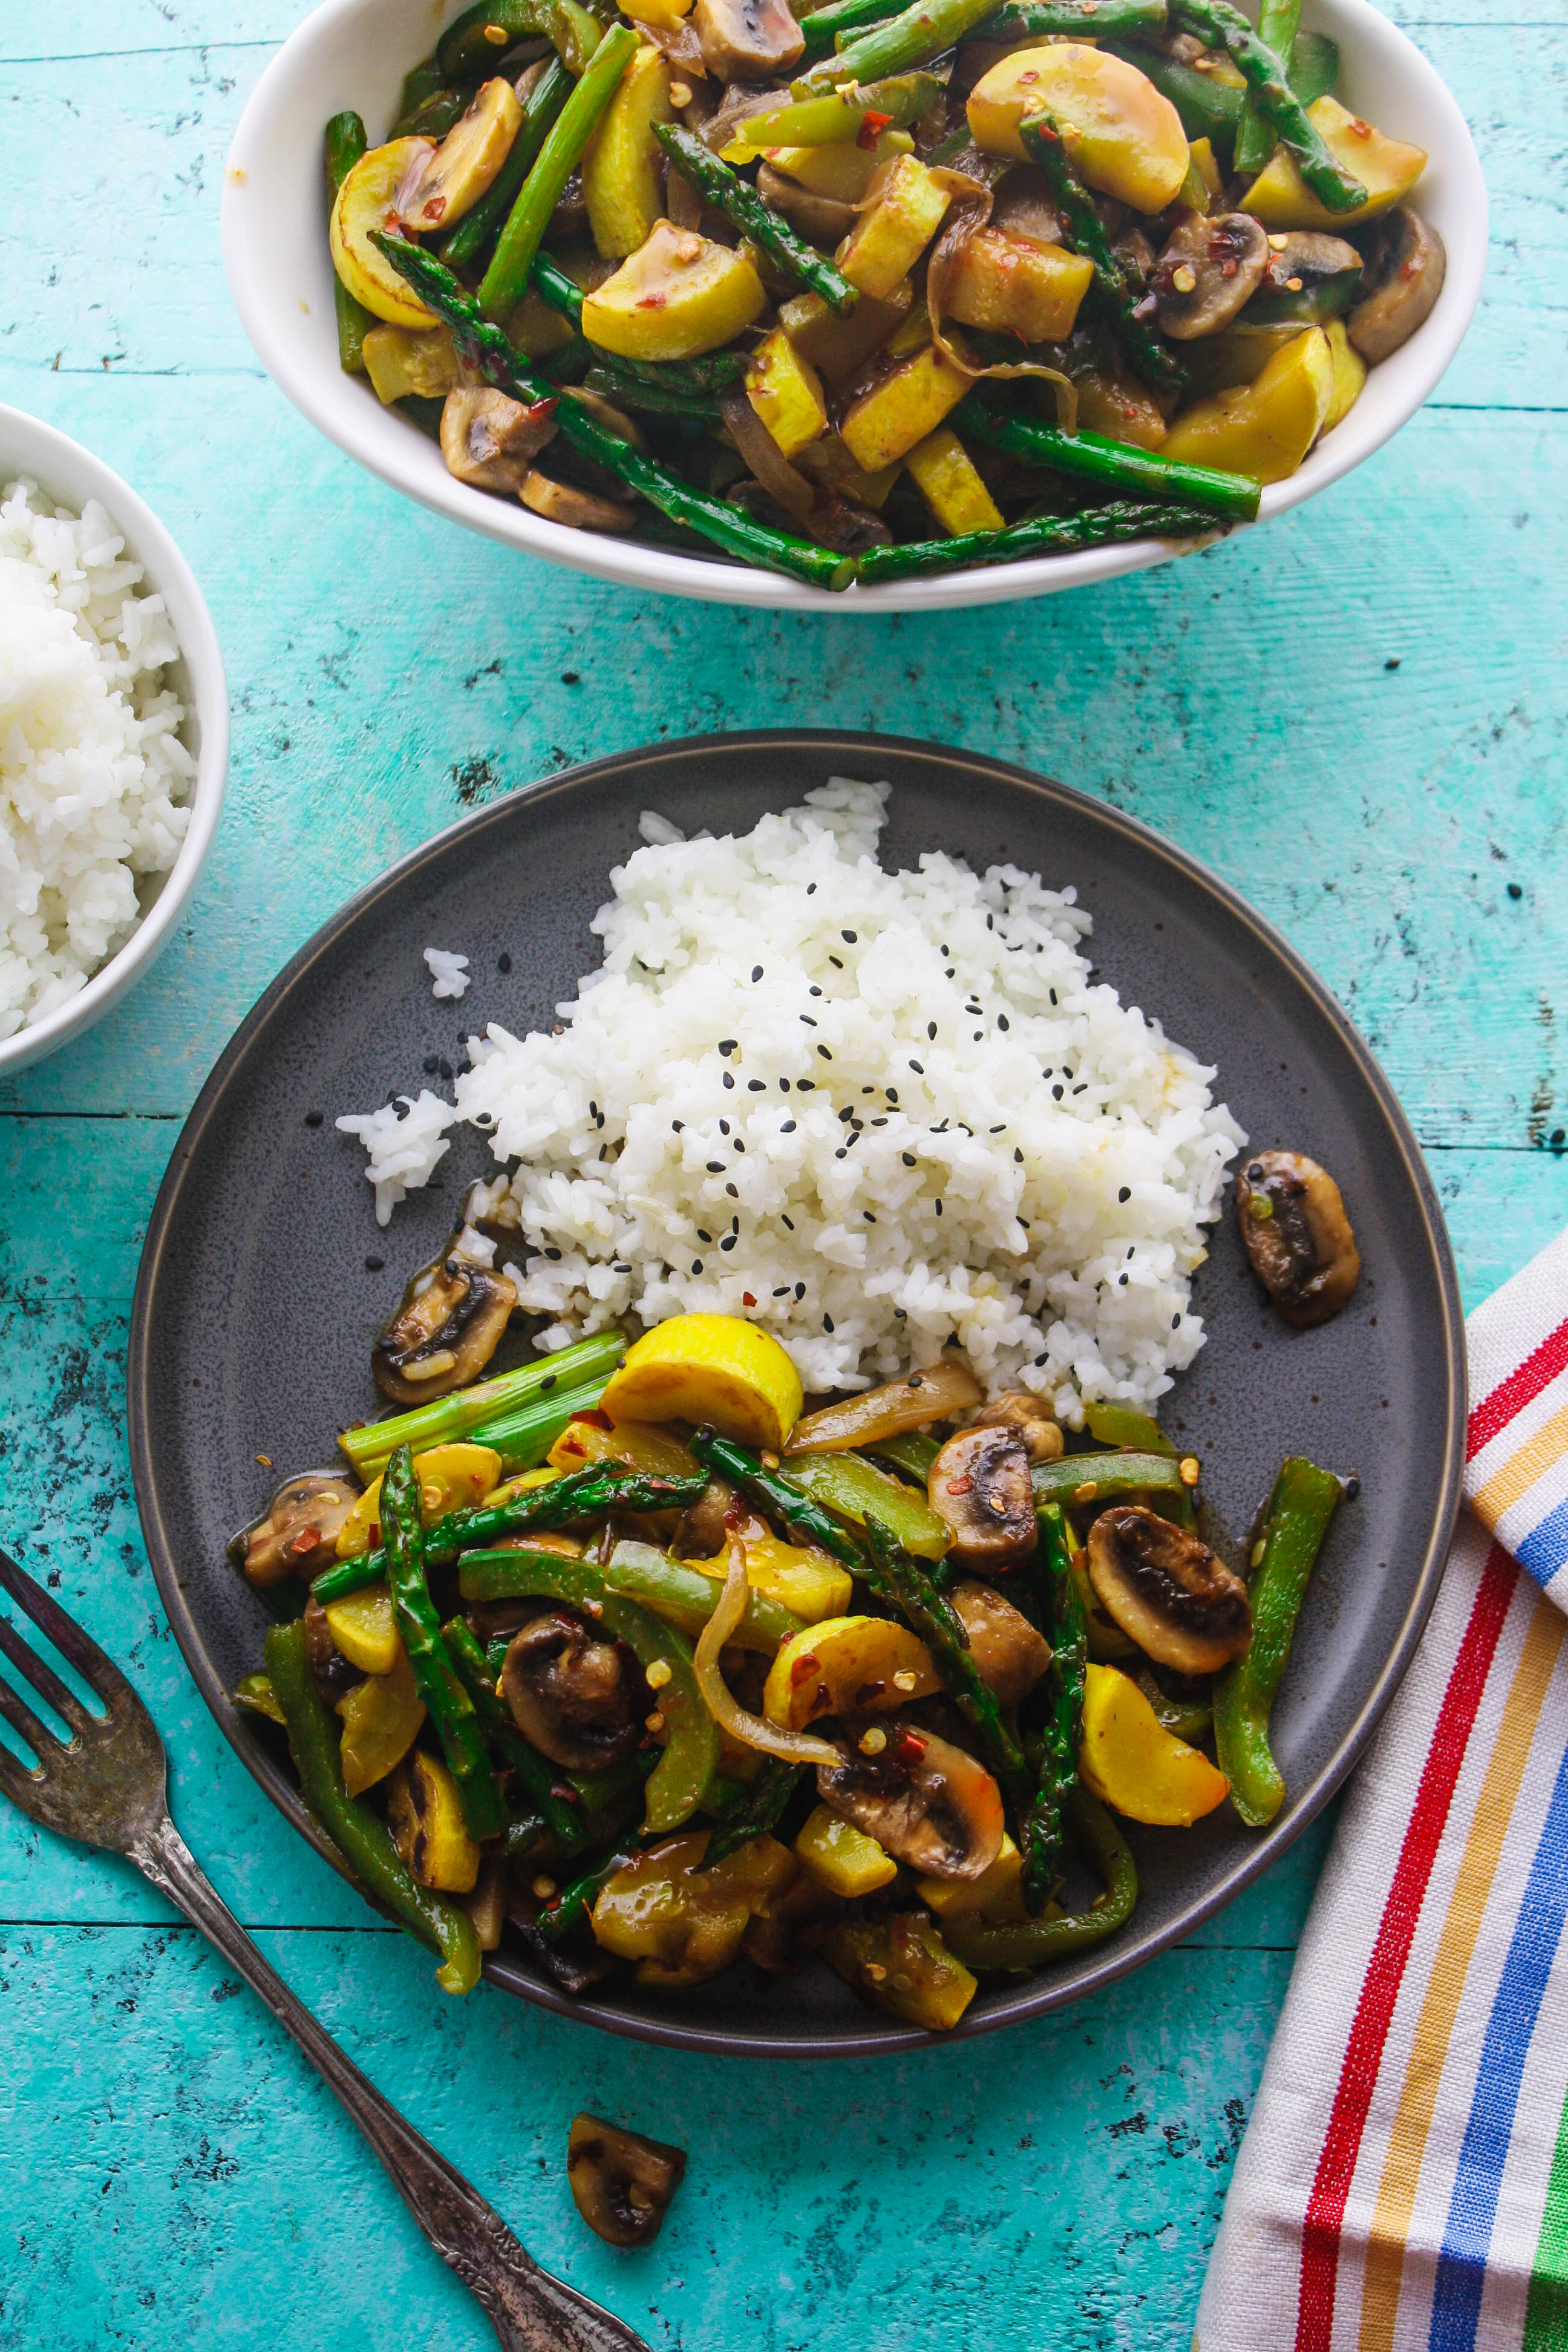 Simple Sweet & Spicy Vegetable Stir Fry is an easy-to-make dish you'll love! Simple Sweet & Spicy Vegetable Stir Fry makes a fabulous meal any night. 